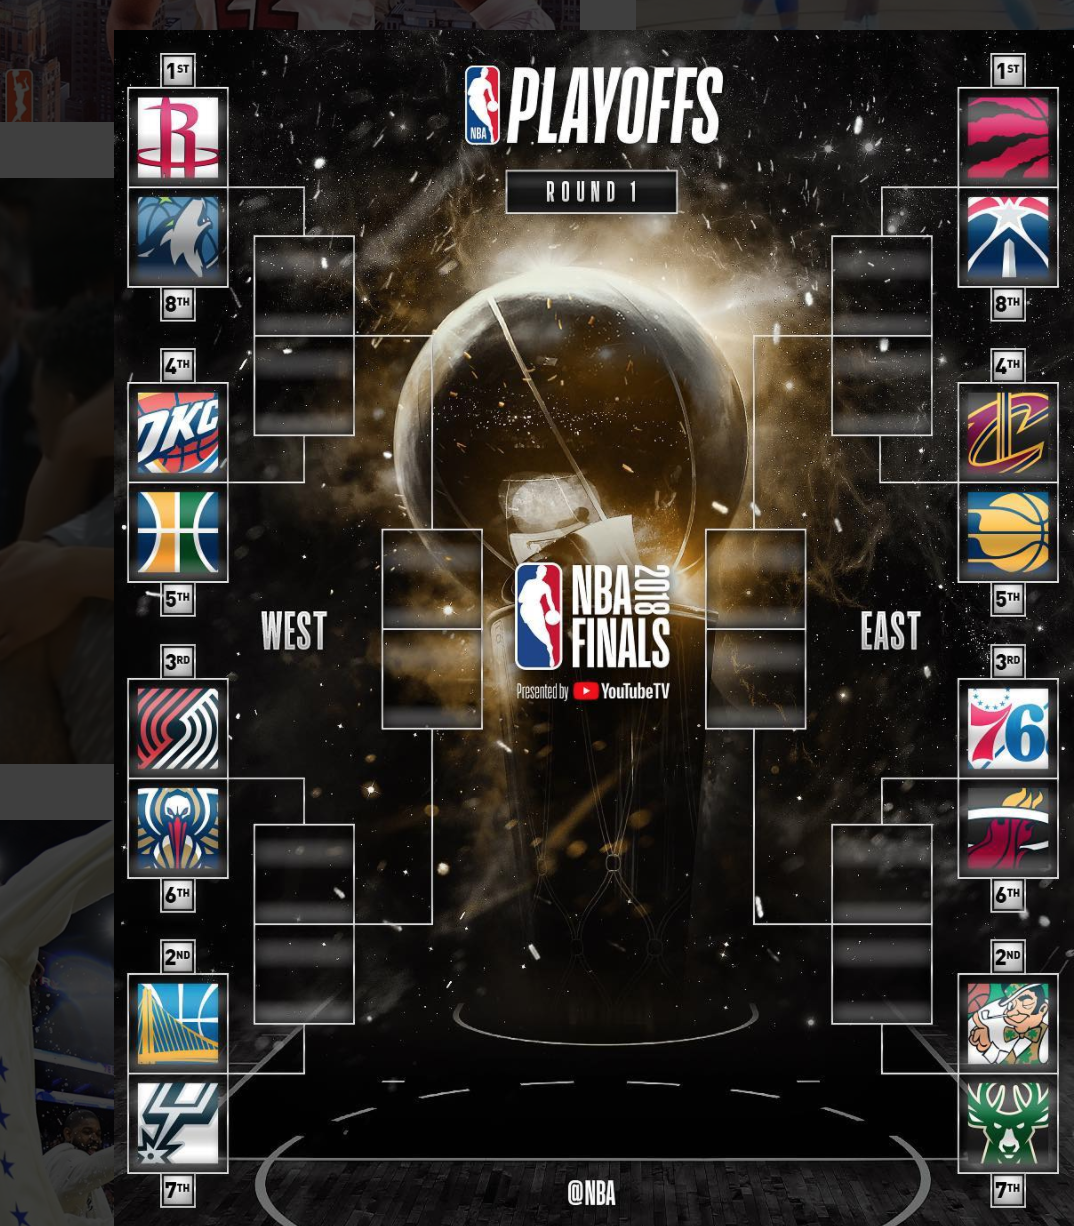 2018 NBA Playoffs Preview Round 1 - Page 2 of 2 - Jocks And Stiletto Jill